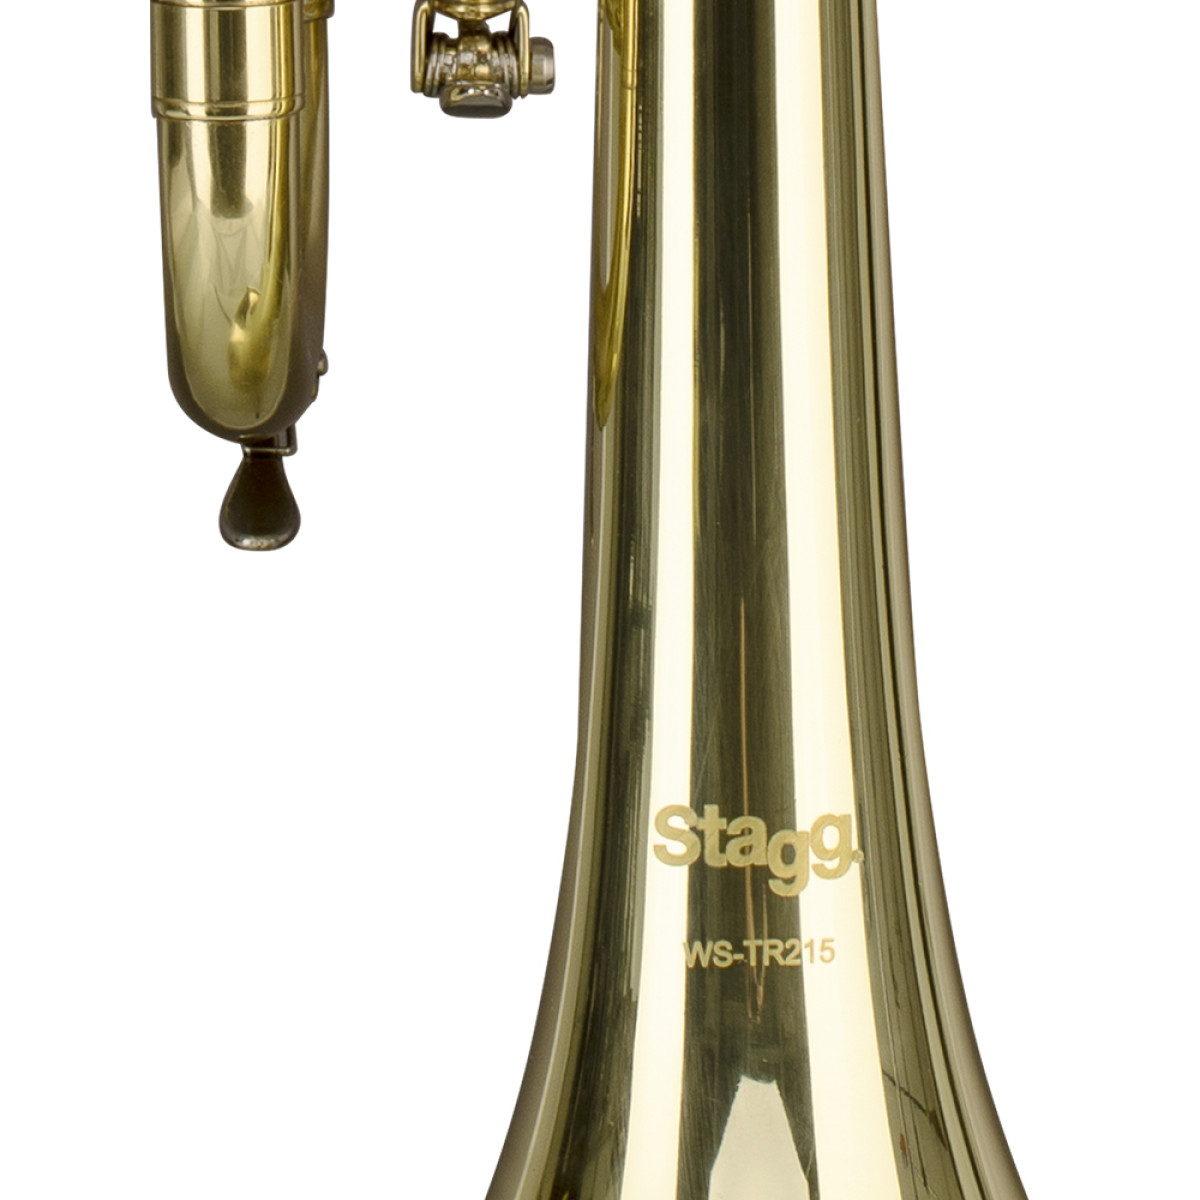 Stagg Tr215s - Trumpet of study - Variation 3